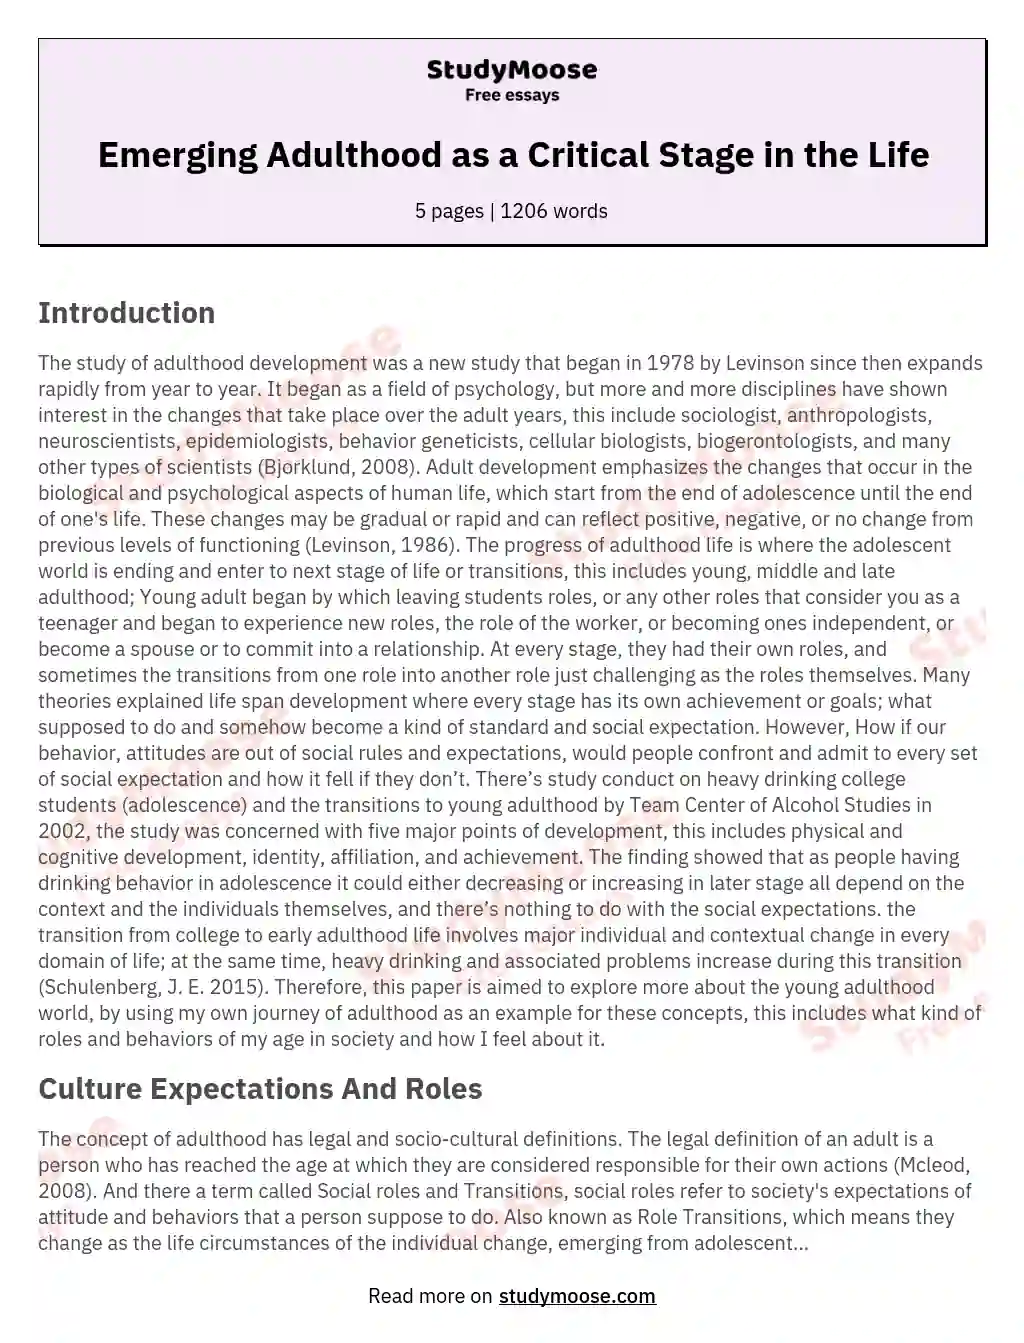 Emerging Adulthood as a Critical Stage in the Life essay